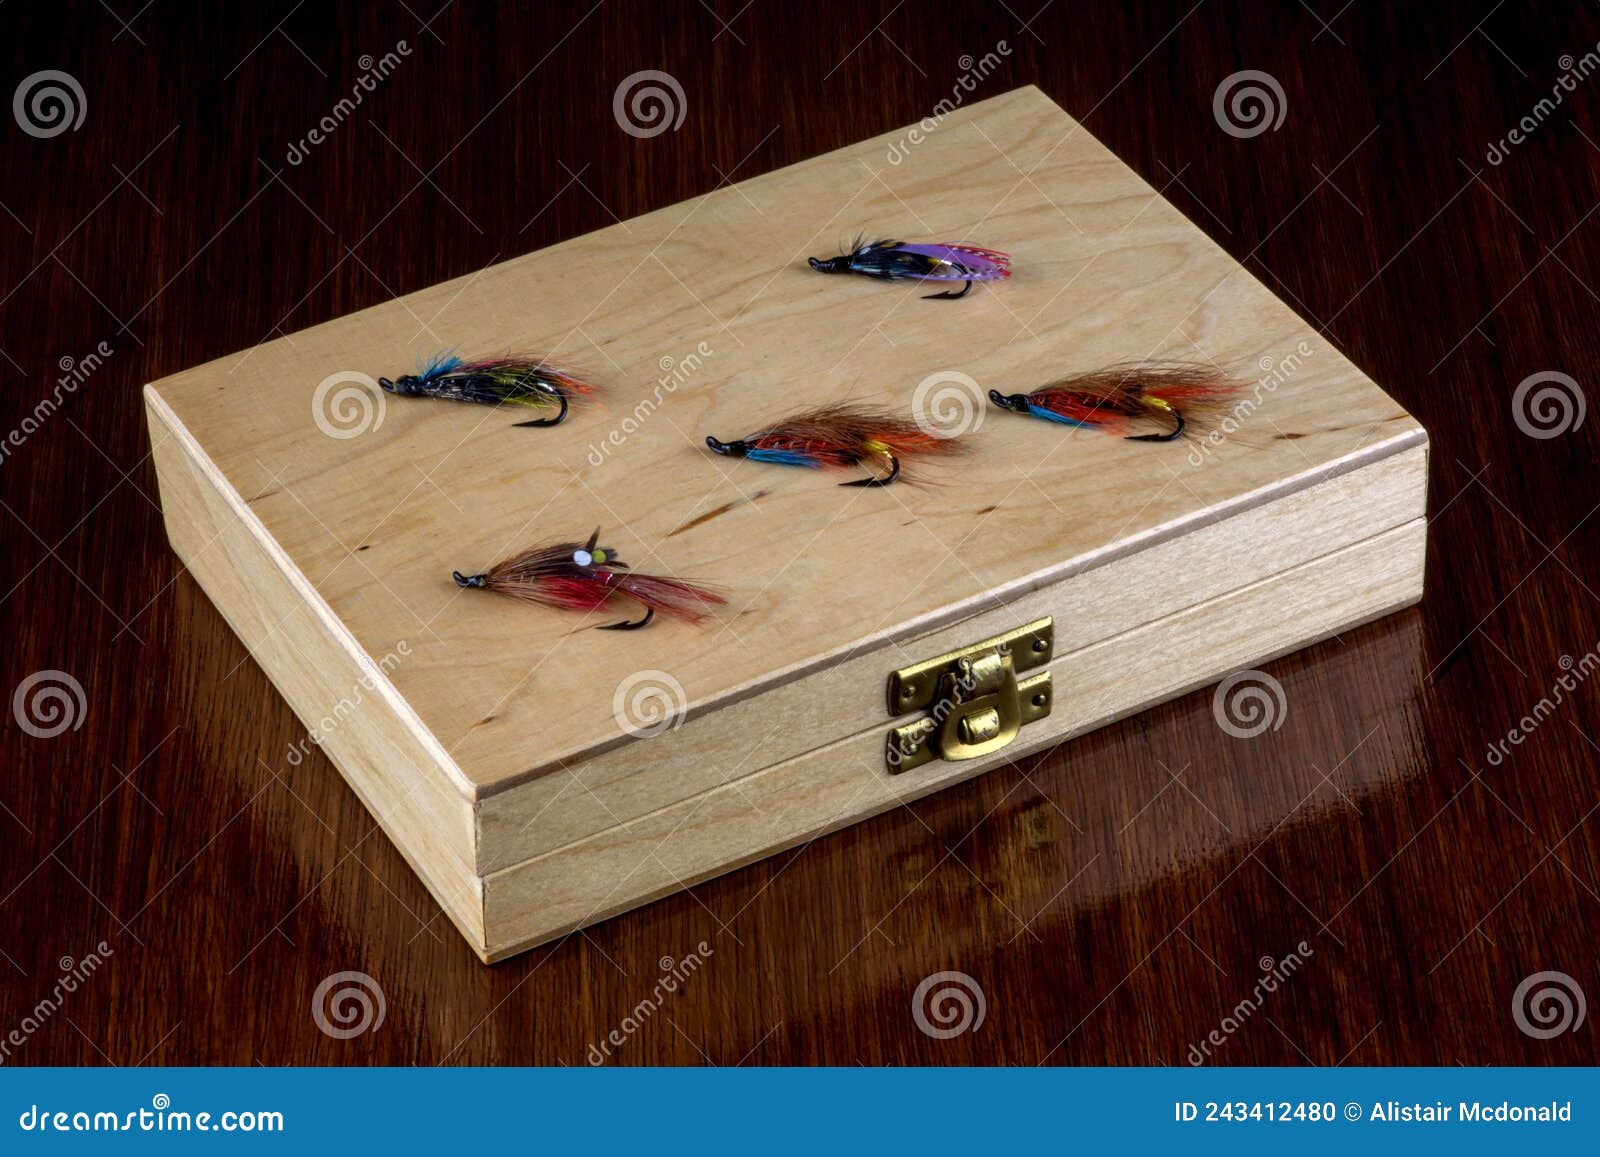 https://thumbs.dreamstime.com/z/old-wooden-fishing-fly-box-salmon-flies-table-top-vintage-polished-surface-243412480.jpg